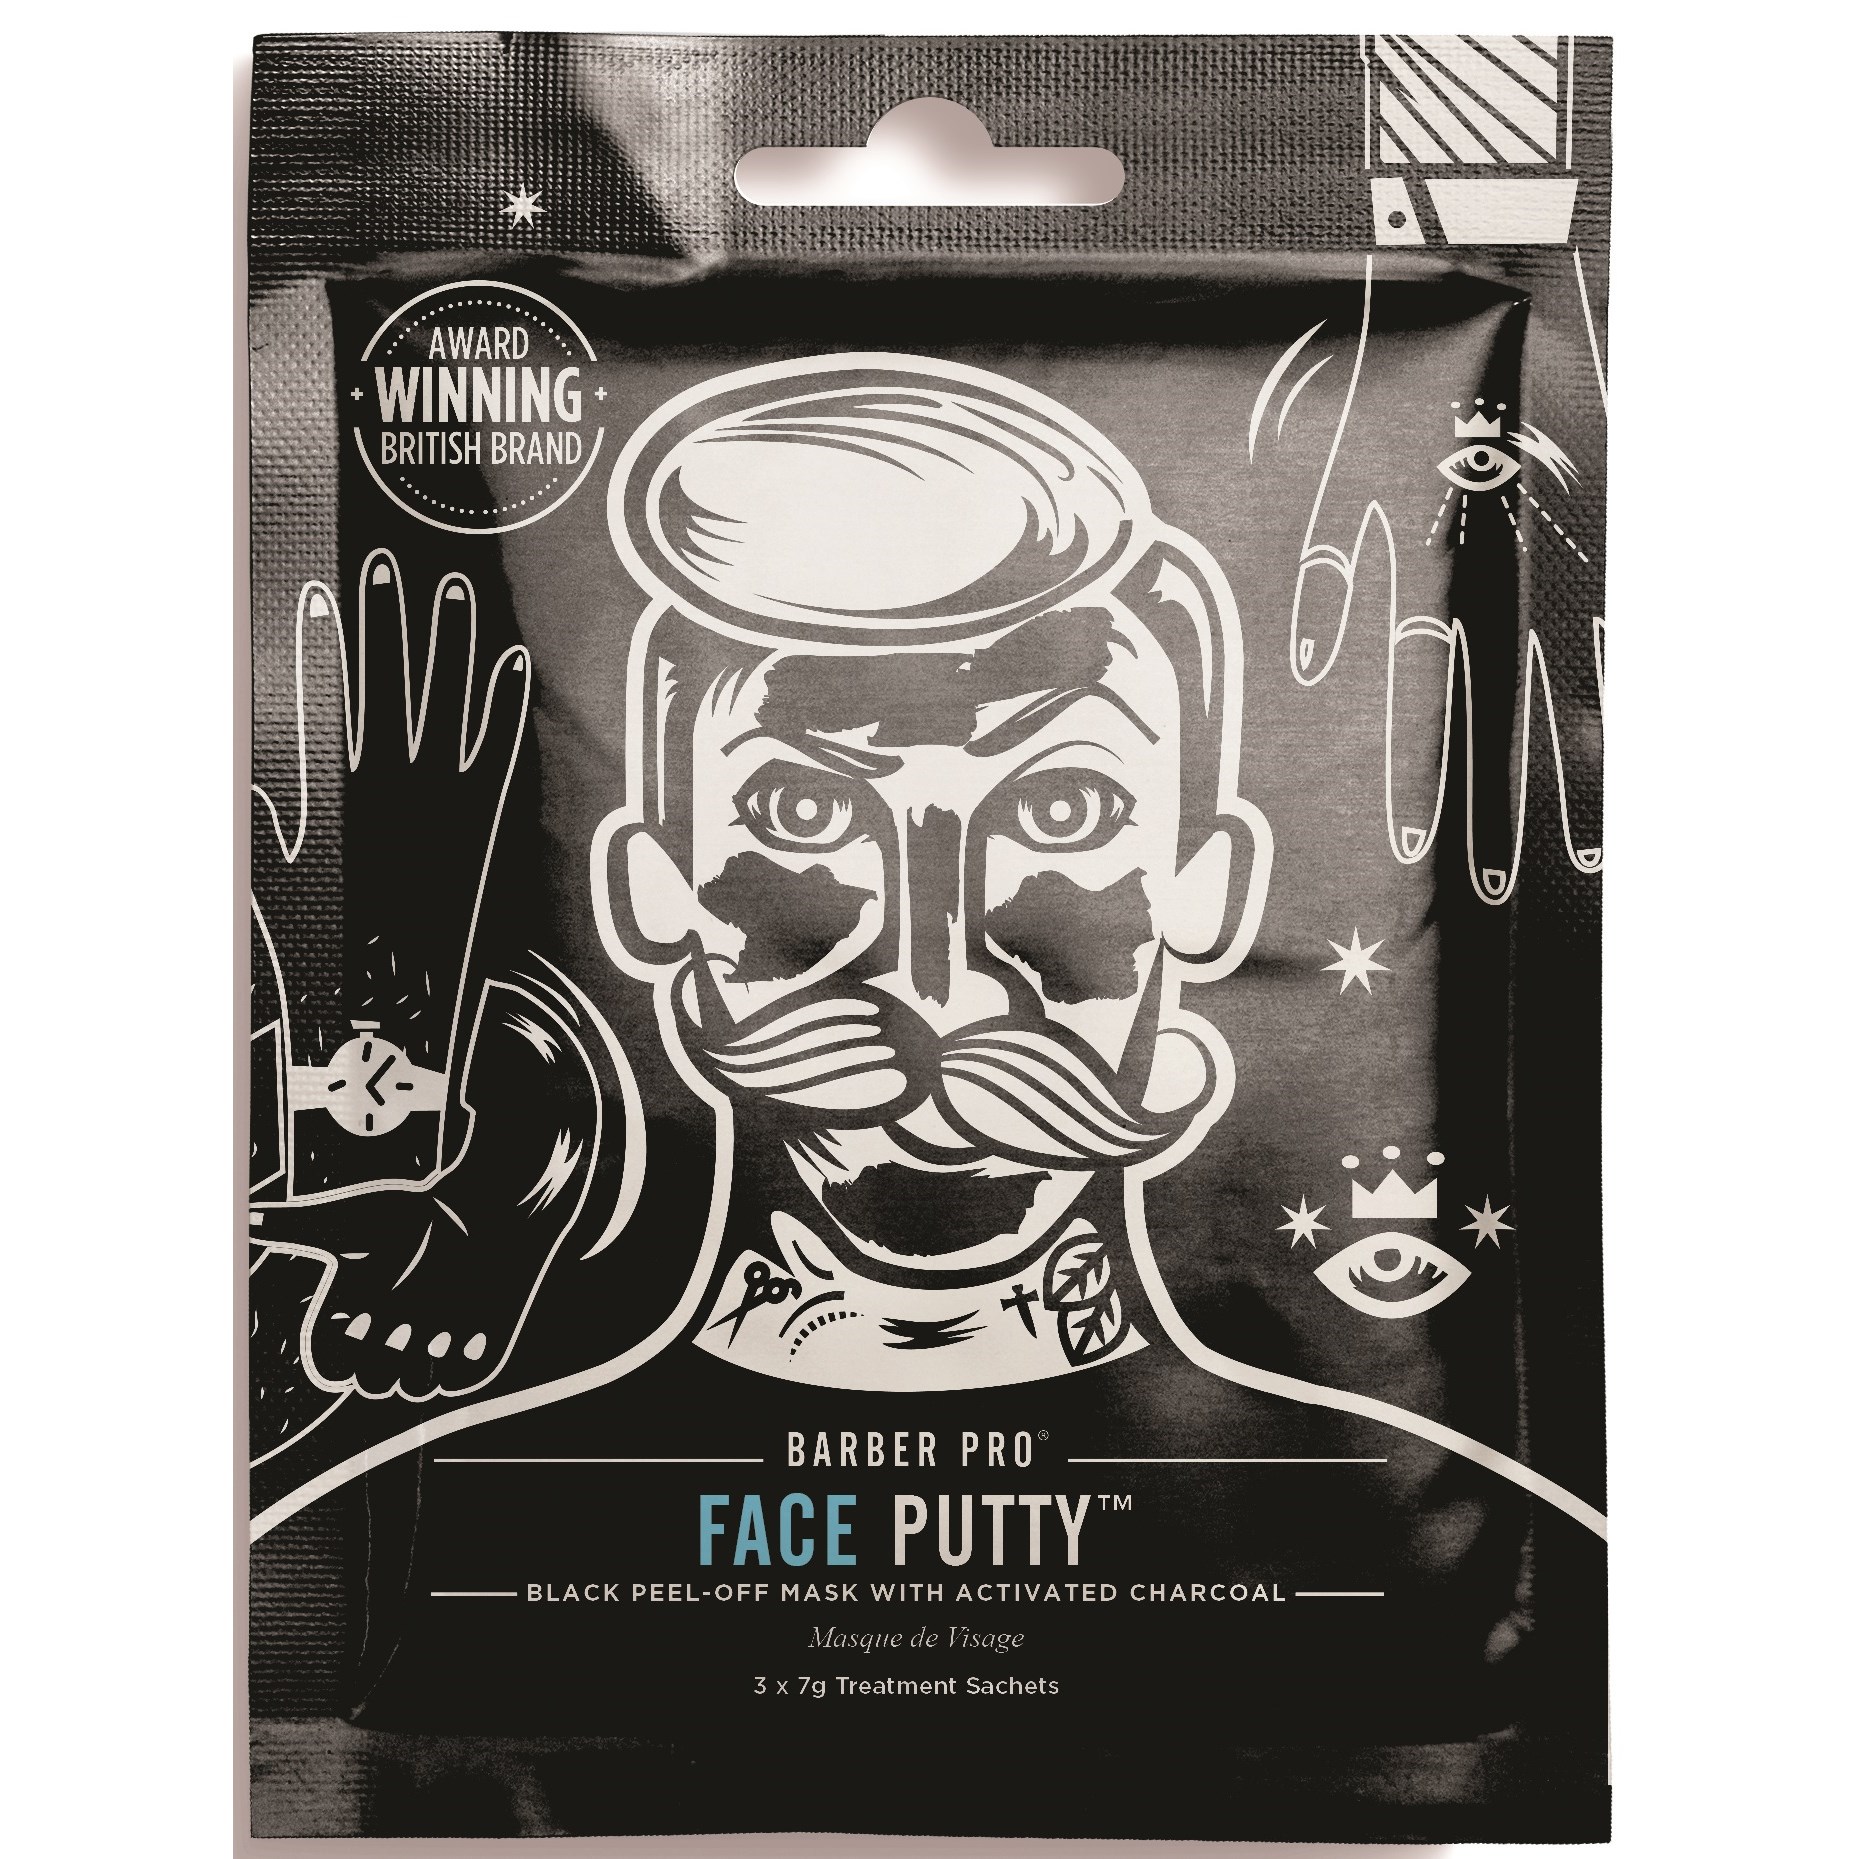 Bilde av Barber Pro Face Putty Black Peel-off Mask With Activated Charcoal